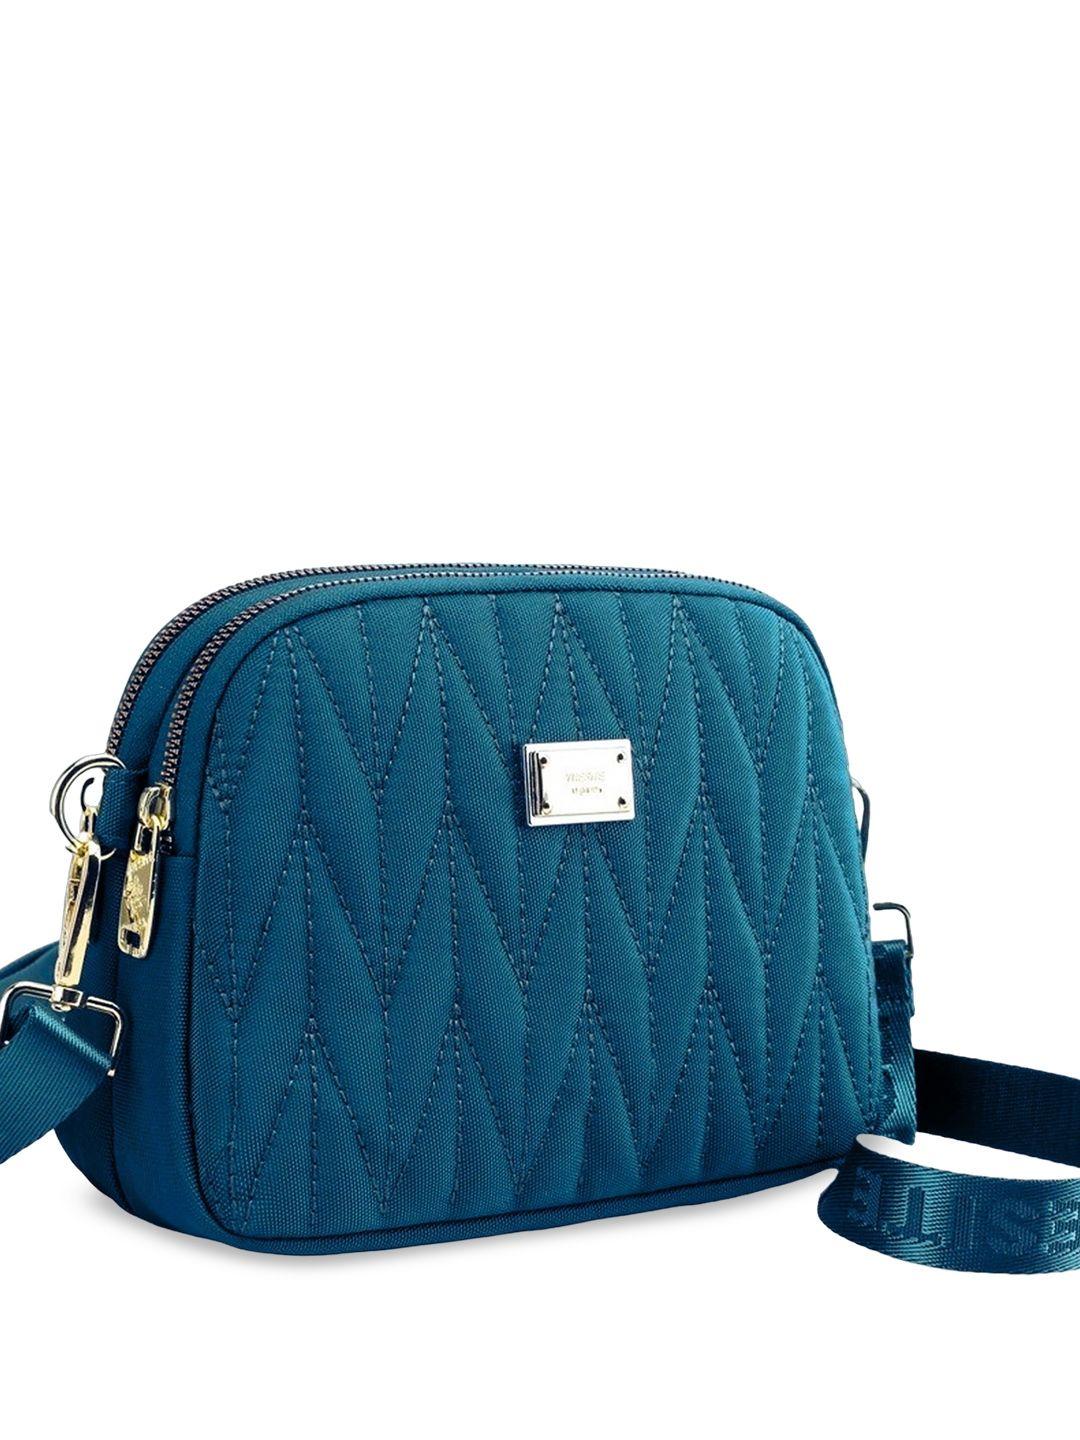 diva-dale-textured-structured-sling-bag-with-cut-work